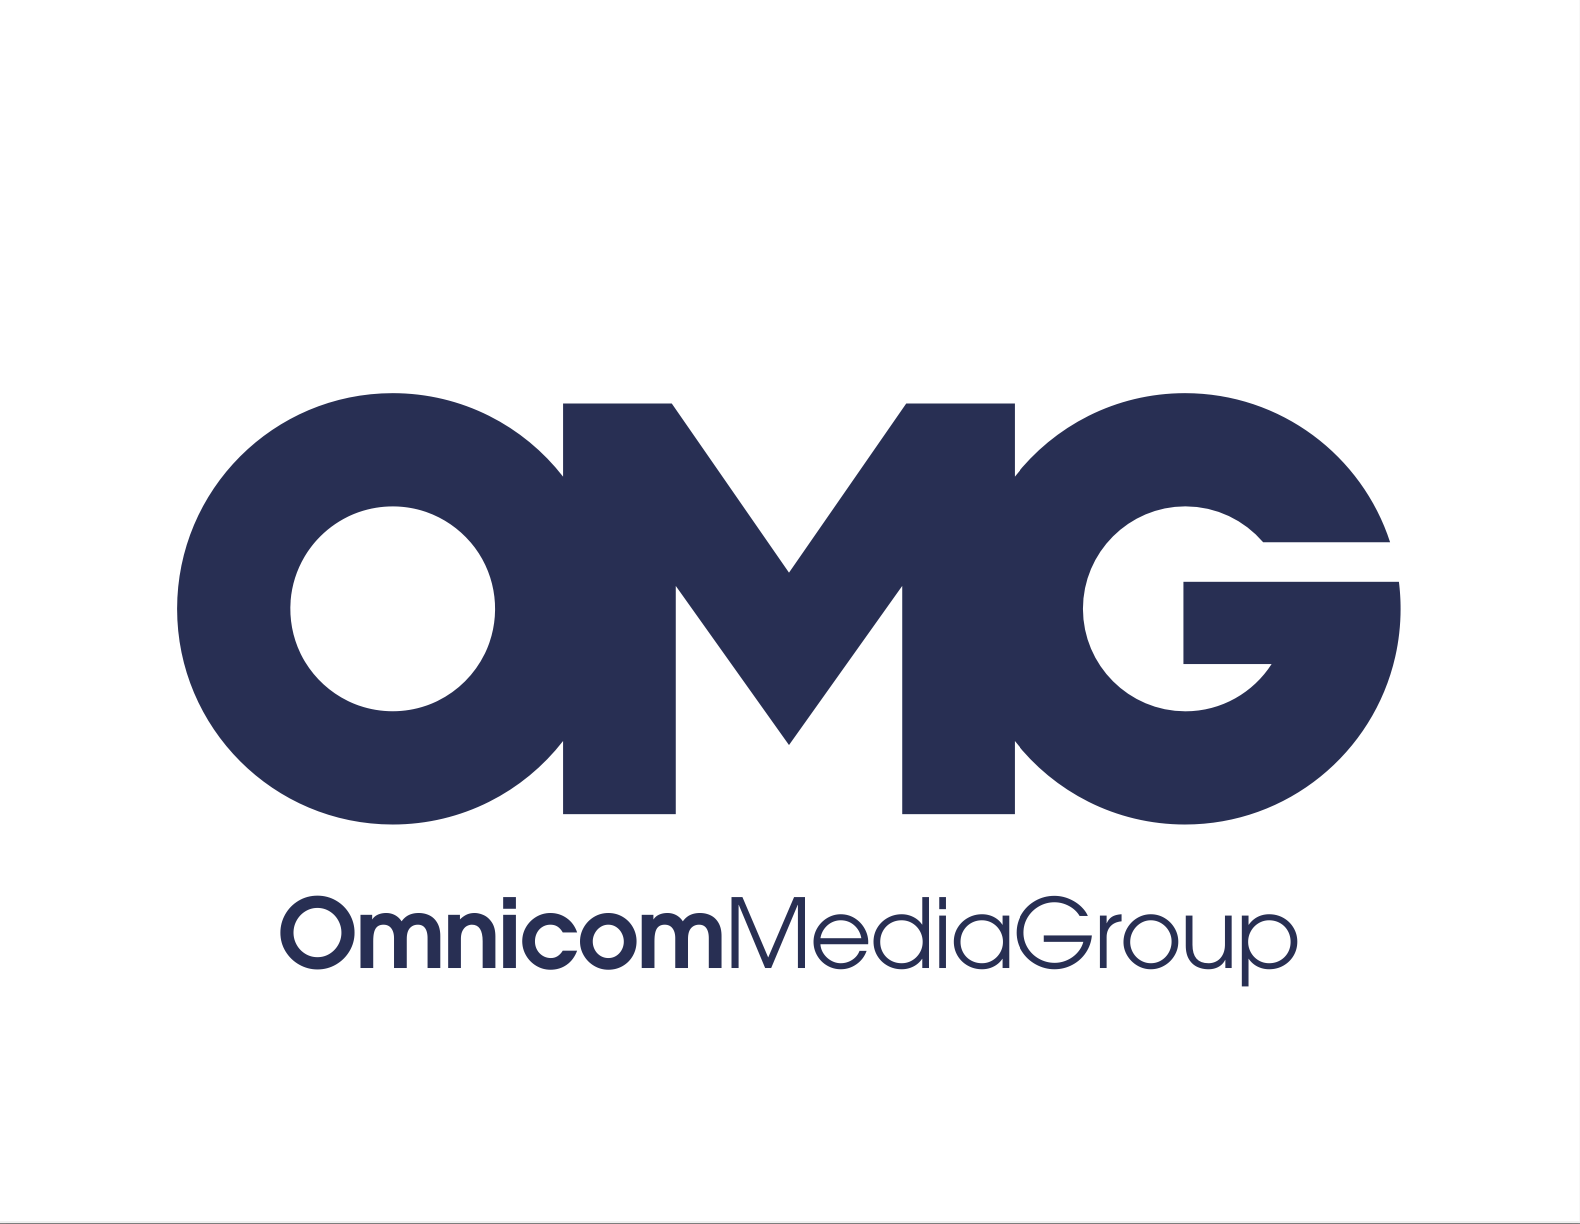 In New Independent Research, Omnicom Media Group Receives Highest Possible Scores in Retail Media, Commerce Media, and Intelligence and Insights Criteria